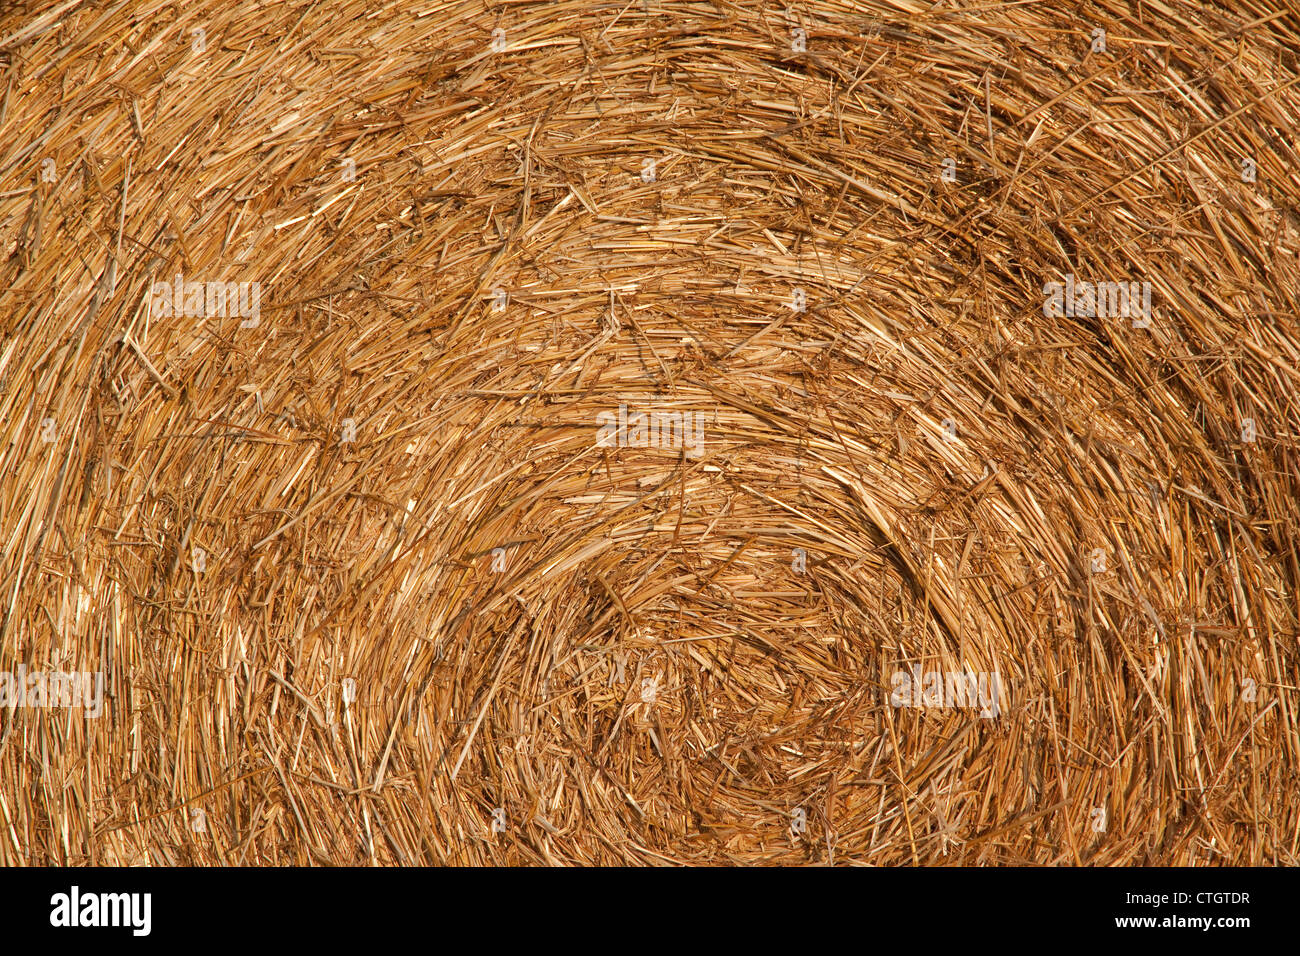 Close view of baled hay central Michigan USA Stock Photo